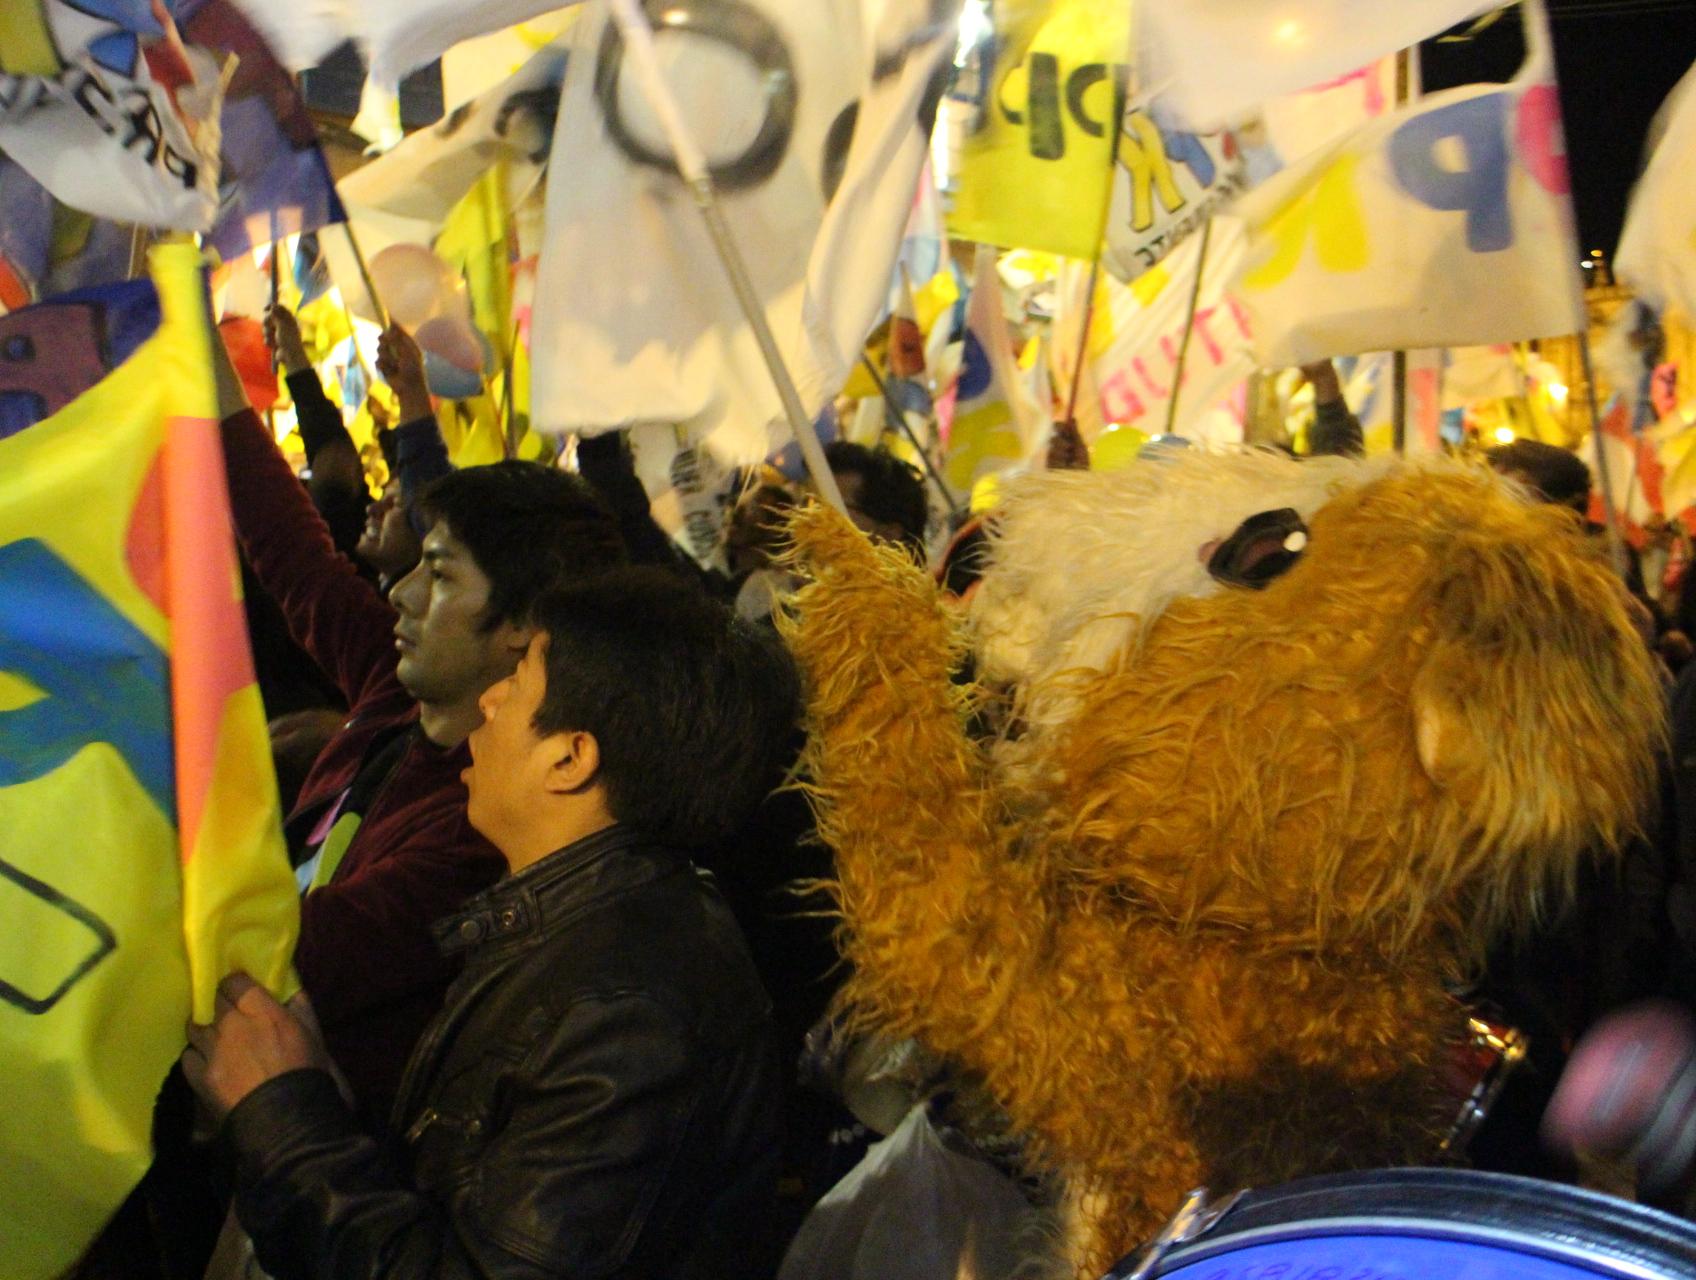 A supporter of Peruvian presidential candidate Pedro Pablo Kuczynski attended the presidential rally in Cuzco dressed as a Guinea pig, Kuczynski's campaign mascot and a symbol of Peruvian culture.